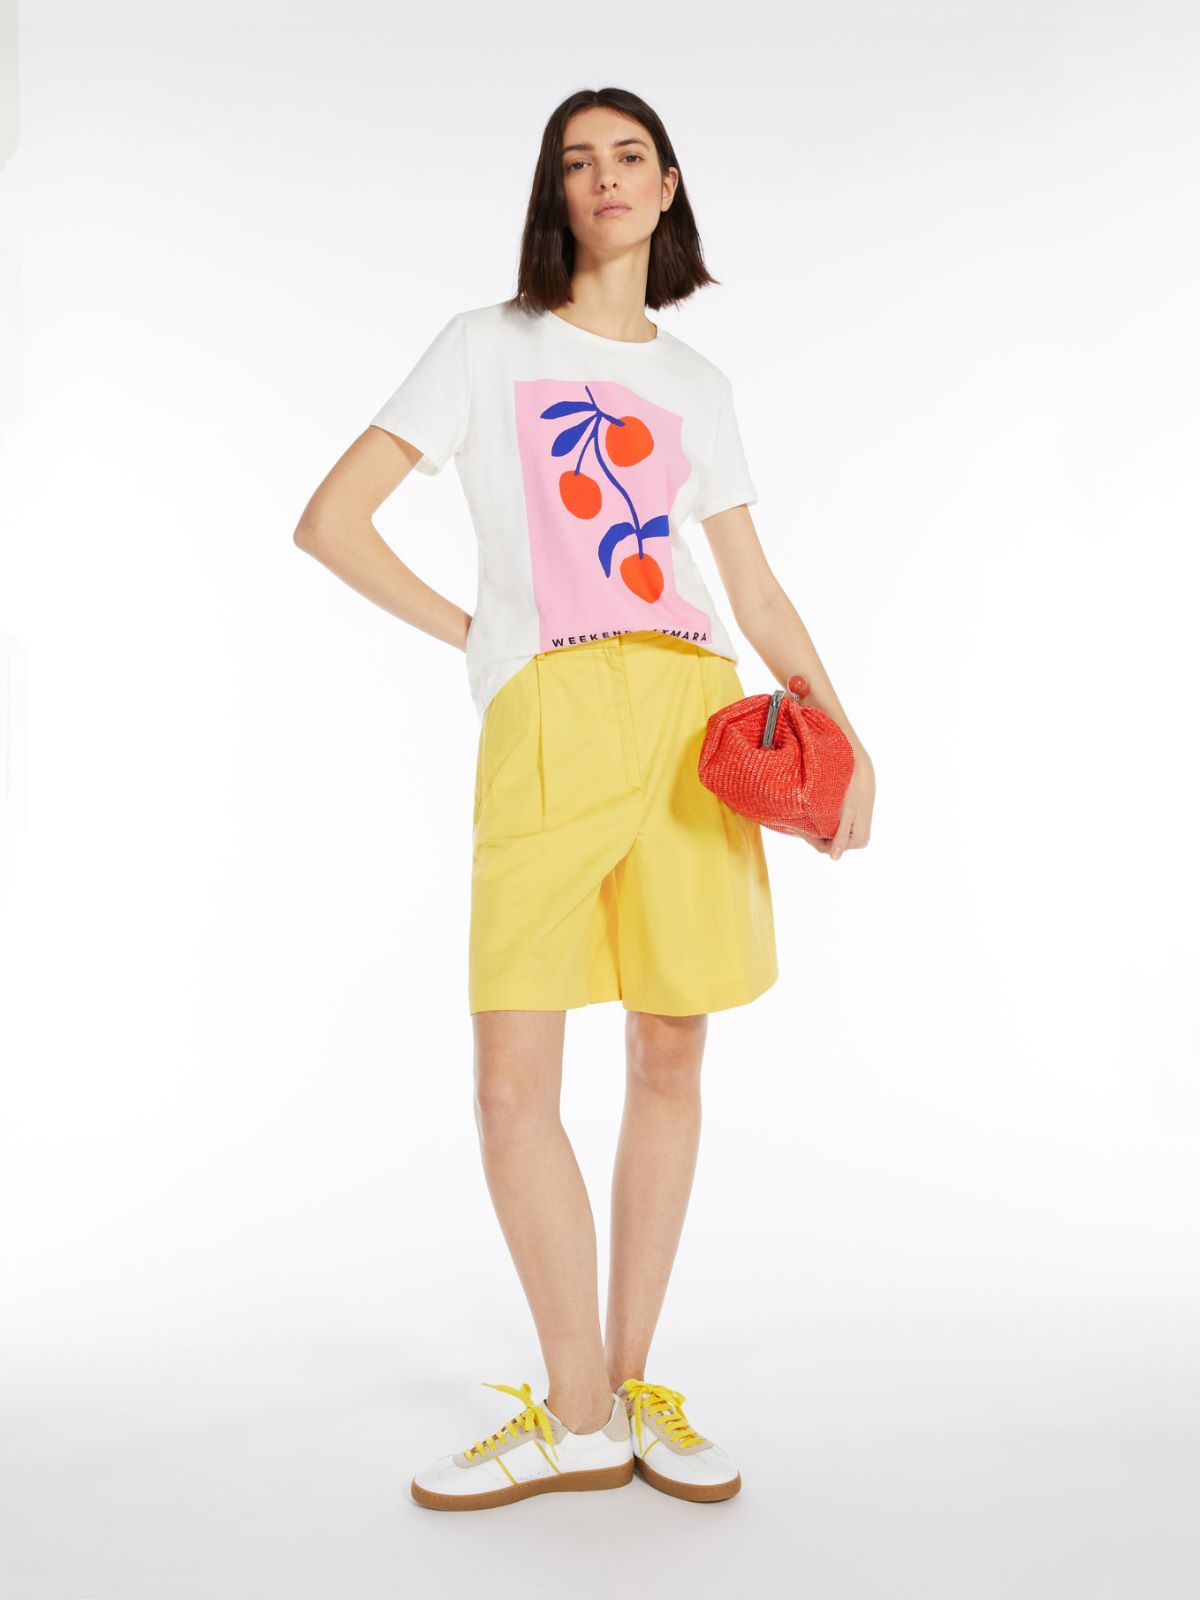 T-shirt in printed jersey - WHITE - Weekend Max Mara